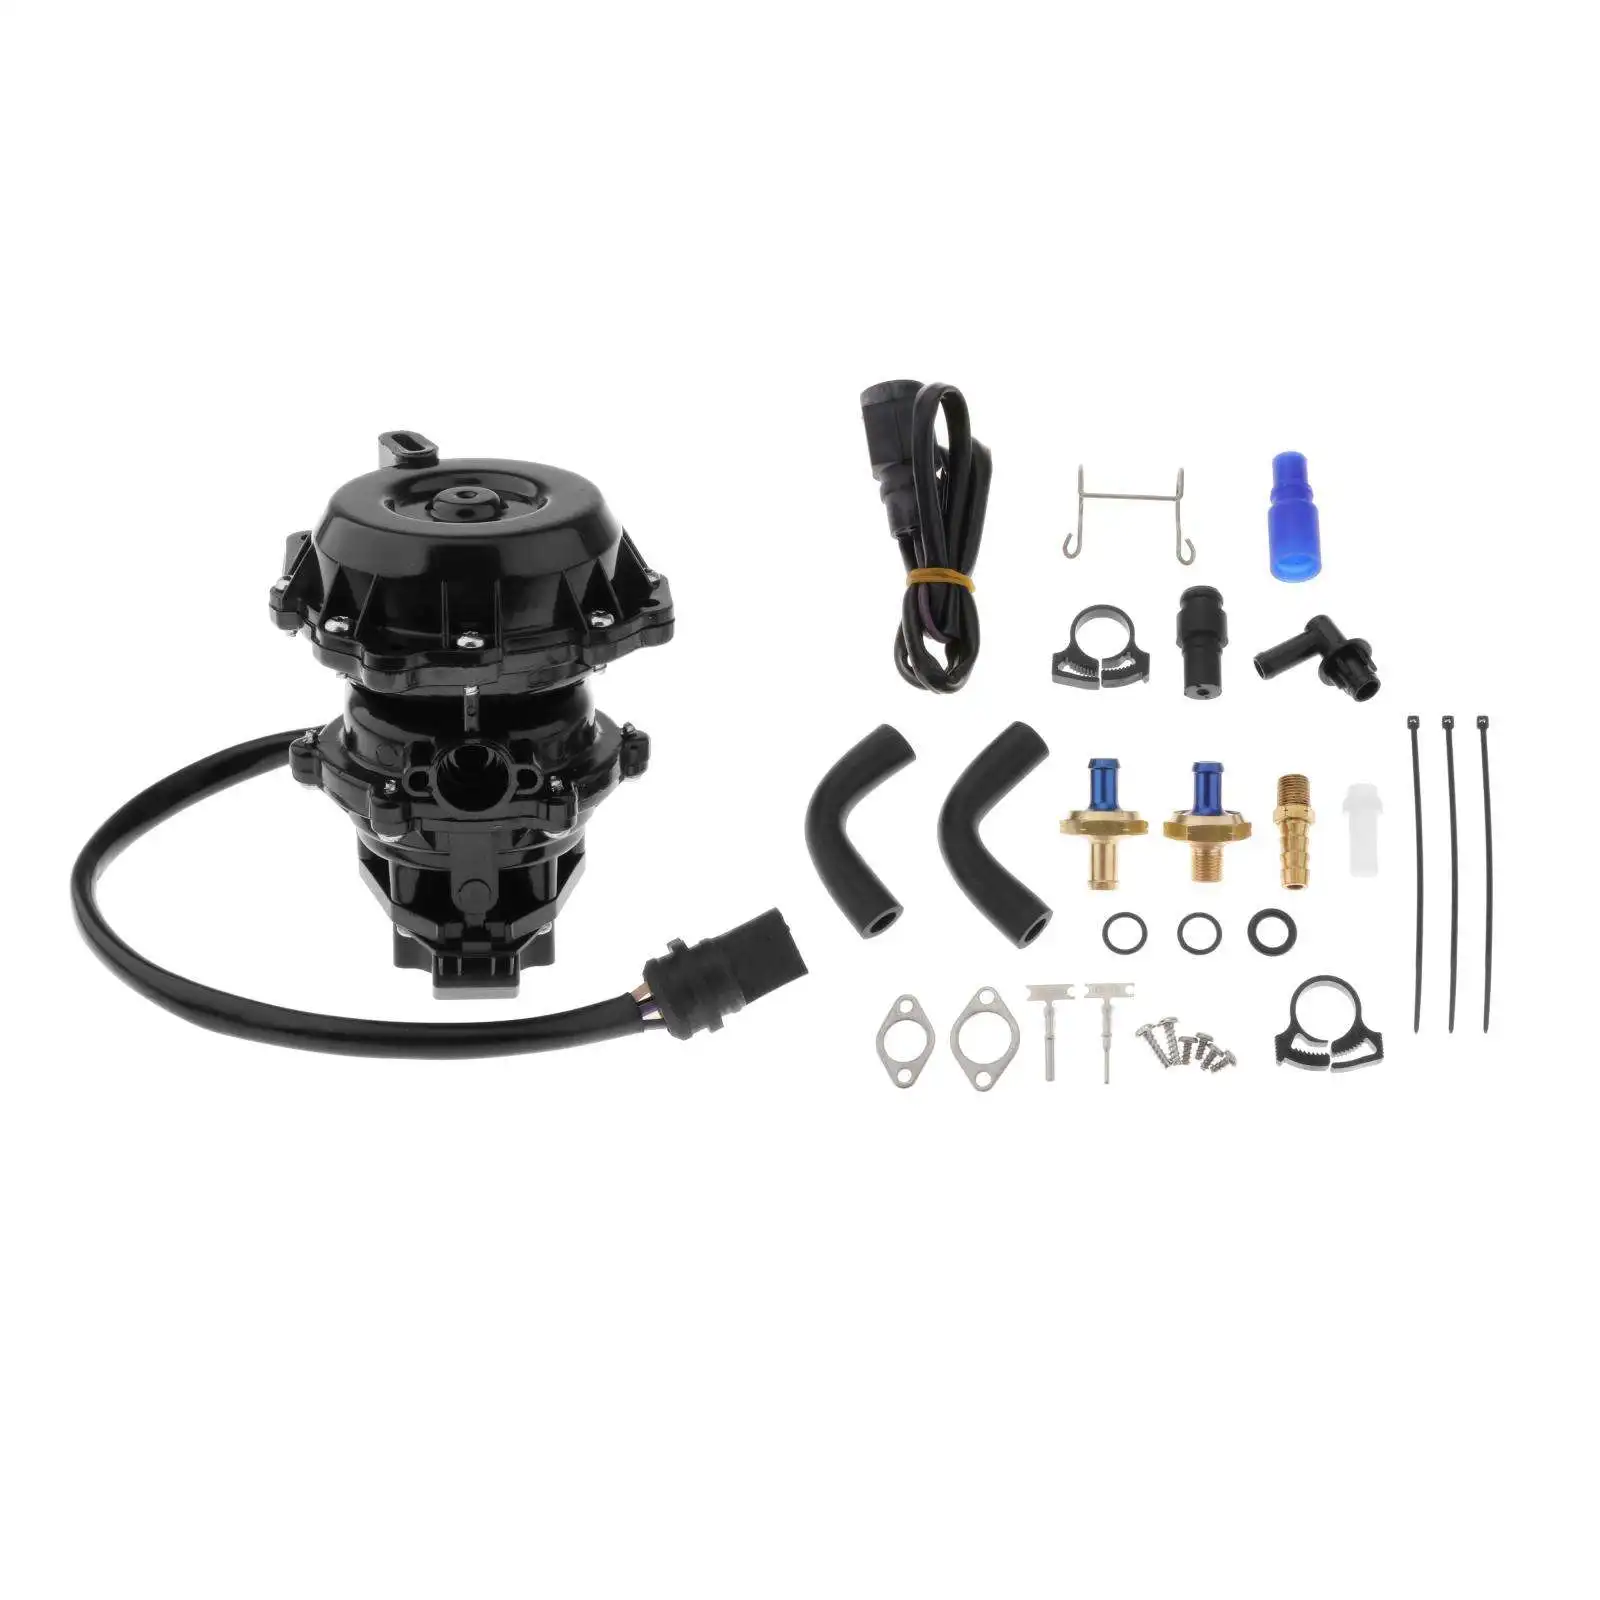 0175163, 0174879, 0174619 VRO Fuel Oil Pump with Kits Accessories for Johnson Evinrude Outboard